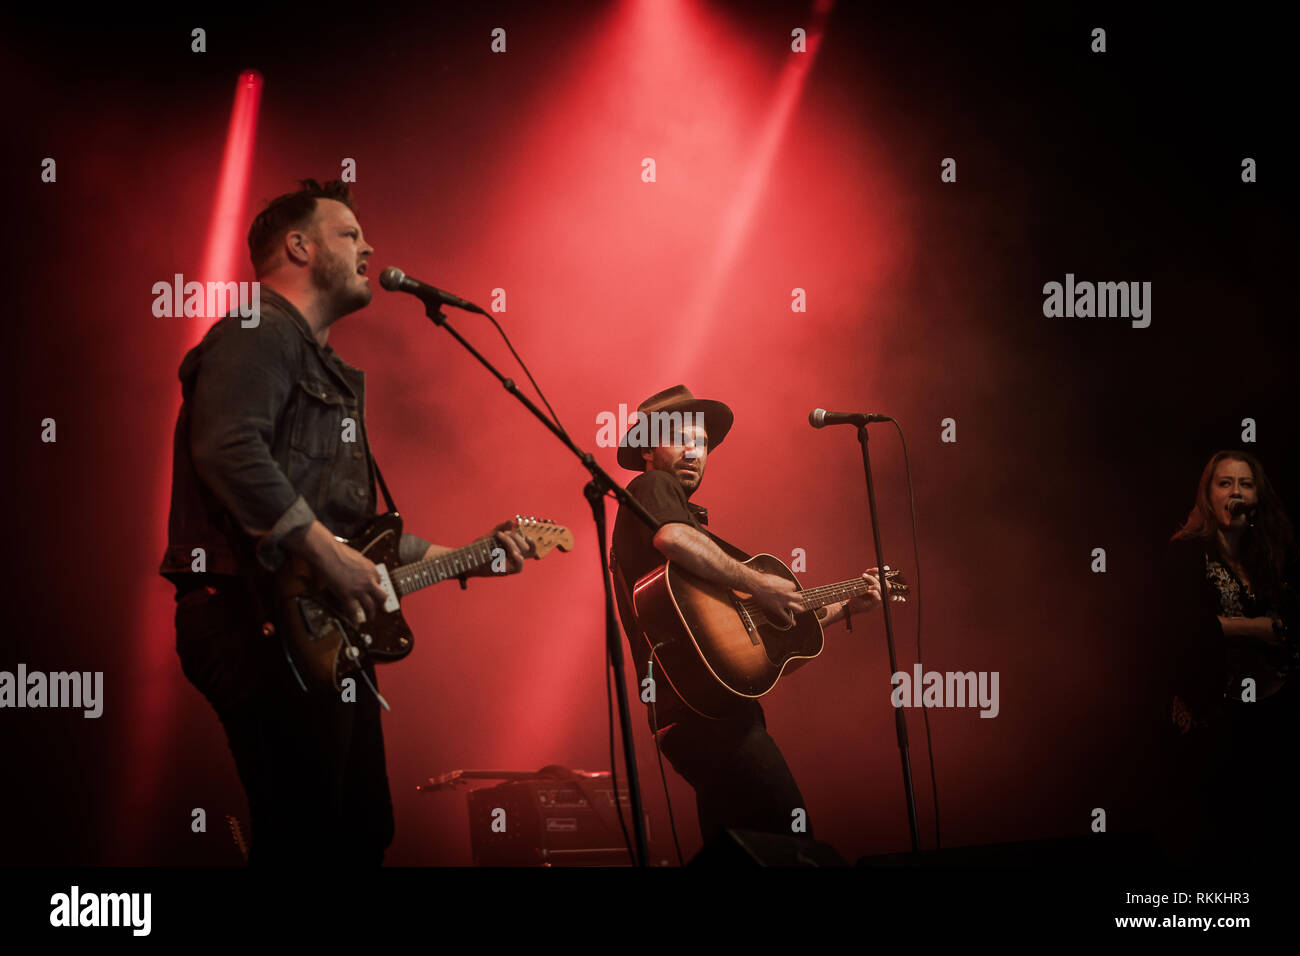 The American band The Lone Bellow performs a live concert at the Danish music festival Jelling Festival 2016. Here singer and musician Zach Williams is seen live on stage with guitarist Brian Elmquist. Denmark, 28/05 2016. EXCLUDING DENMARK. Stock Photo